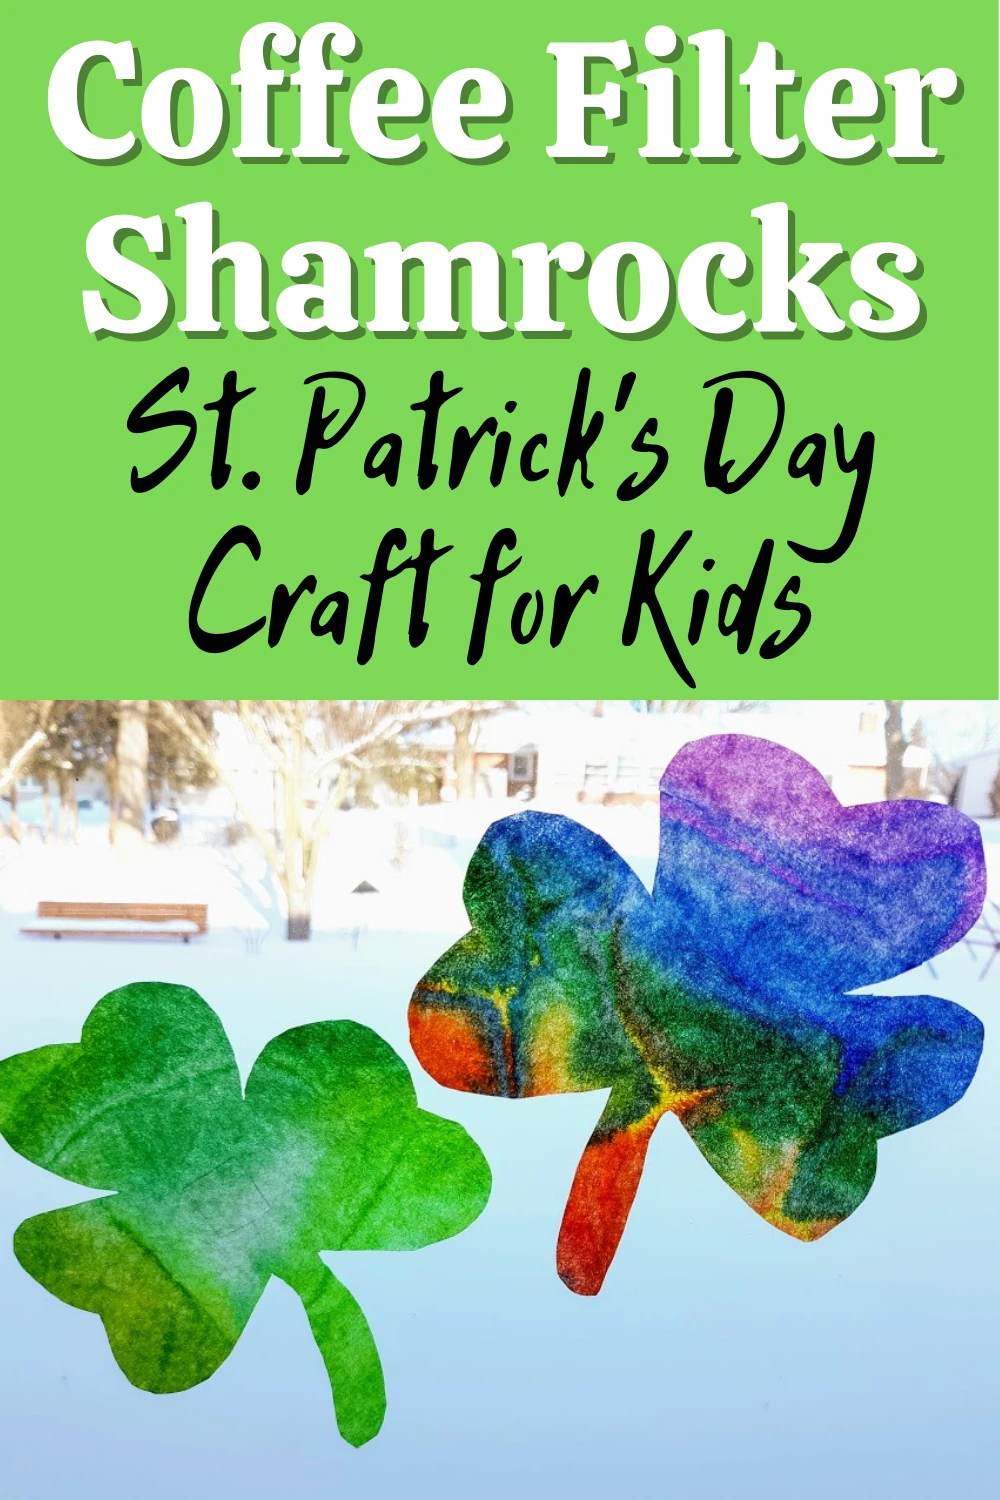 White and black text on green square on top half of image reads: Coffee Filter Shamrocks St. Patrick's Day Craft for Kids. Lower half of image shows one green and one rainbow tie dyed coffee filters cut into shamrock shapes in a bright wintery window.